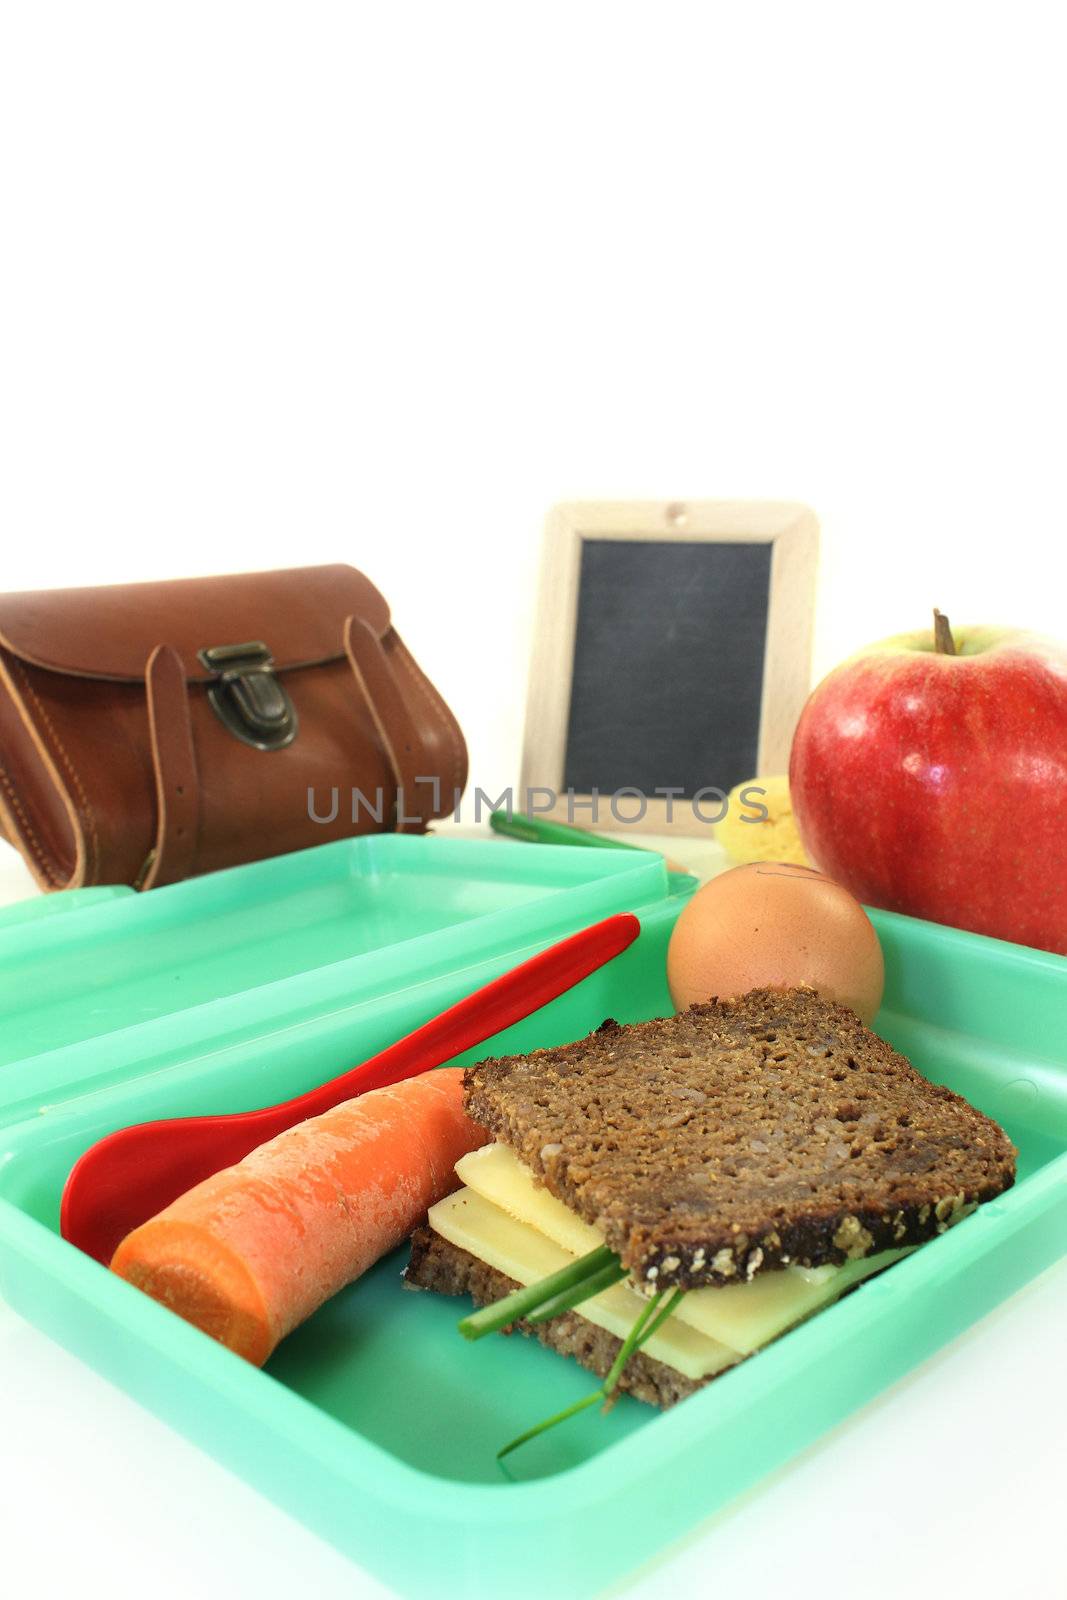 a lunch box with a busy slice of bread and a carrot and an apple